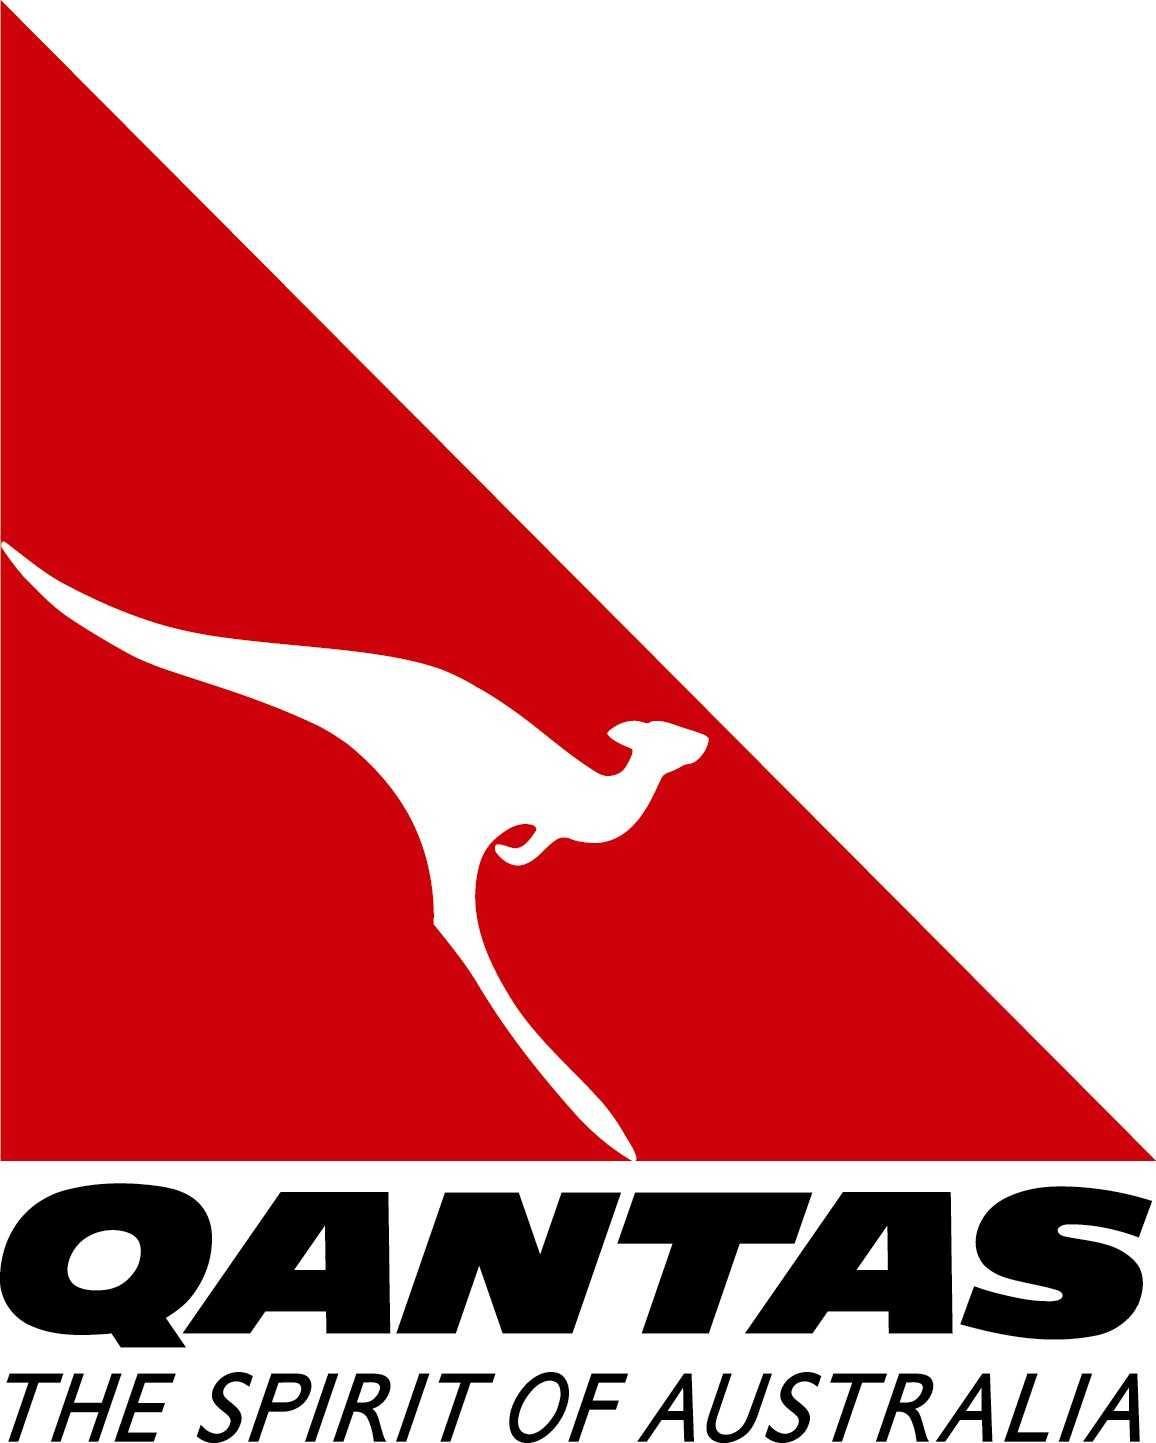 Oldest Airline Logo - Qantas in an Australian airlines company located in Botany Bay ...